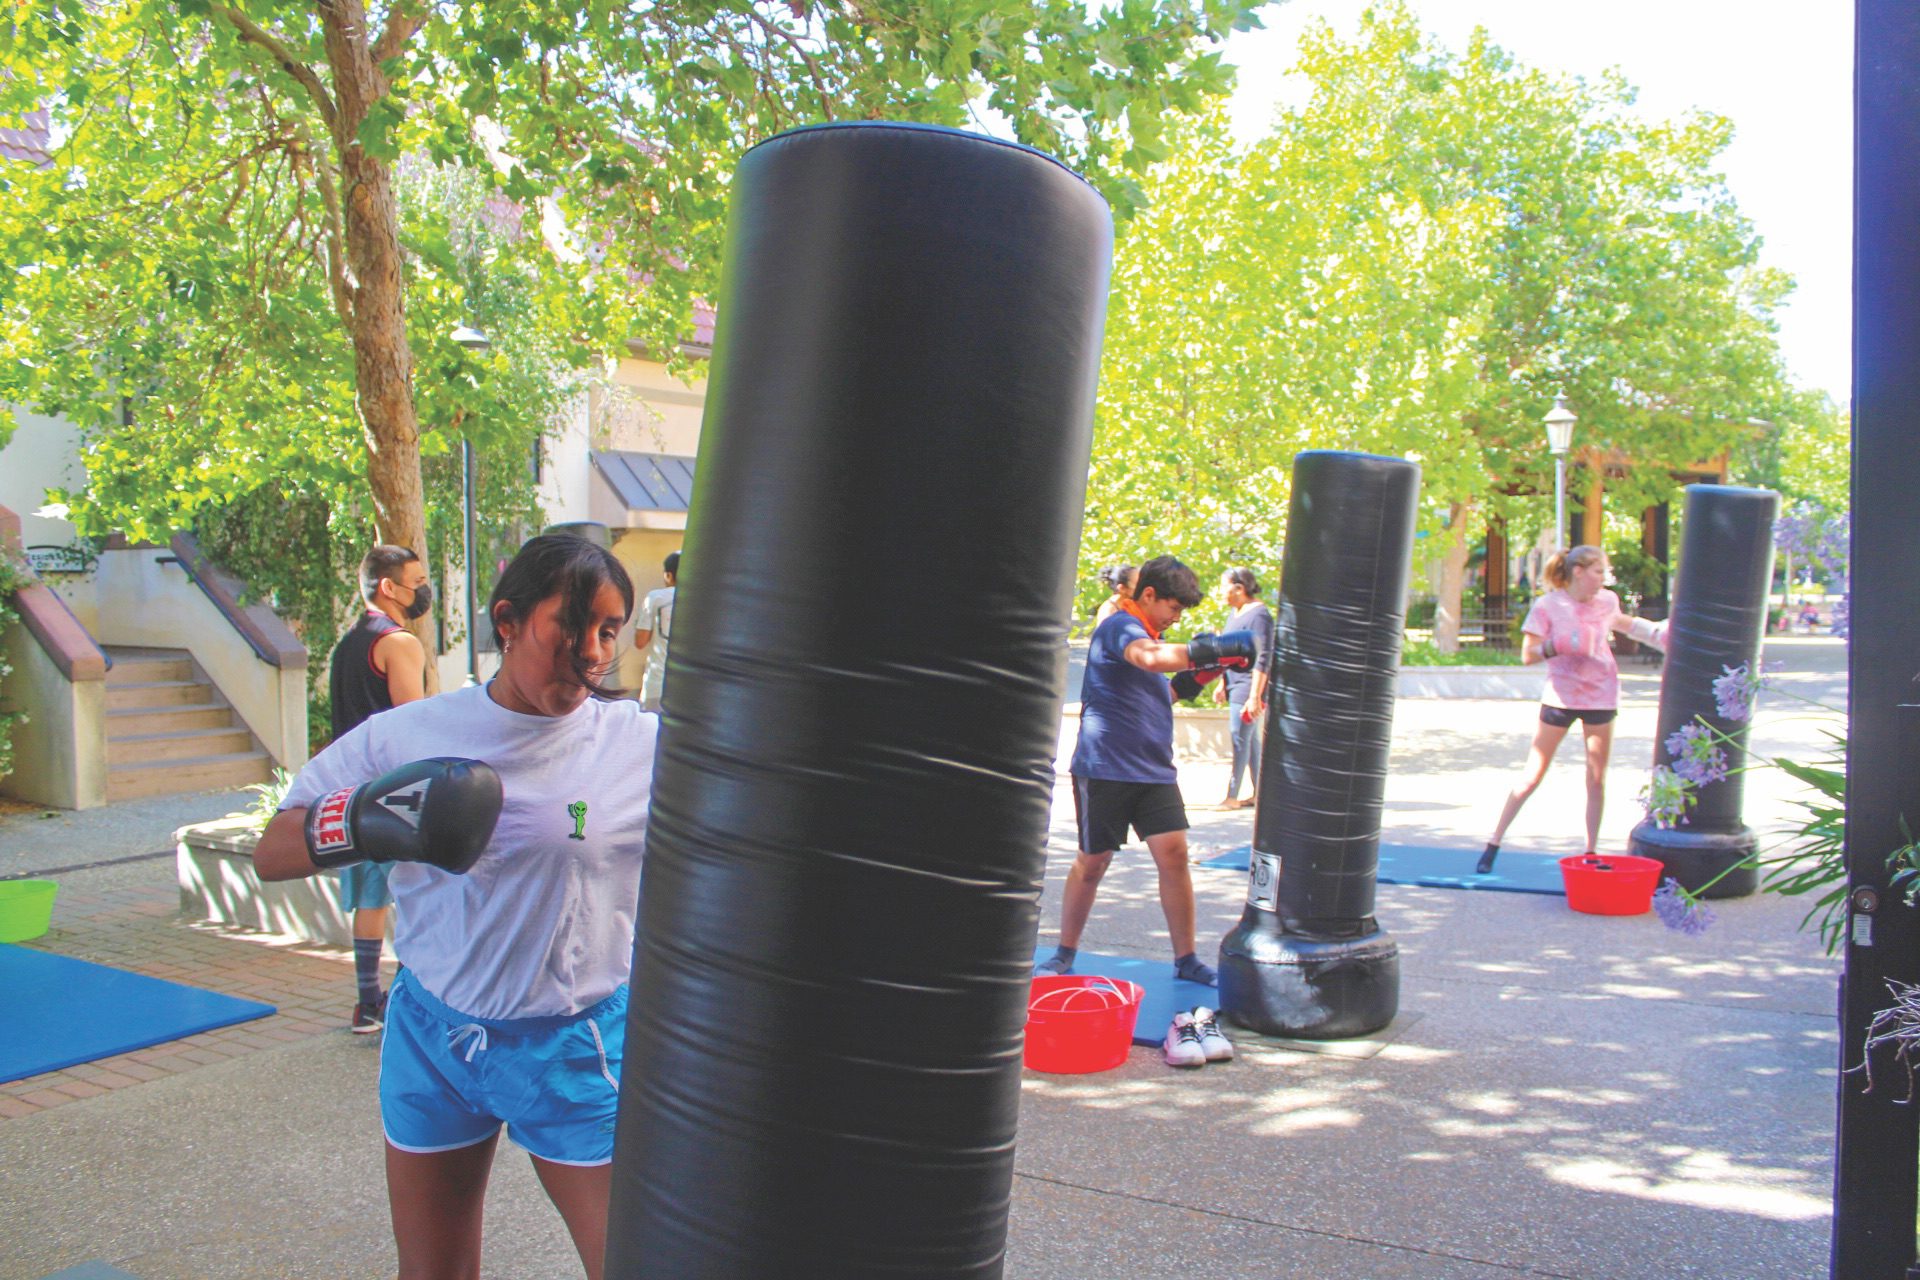 Youth Empowered hitting back with creative solutions to workouts